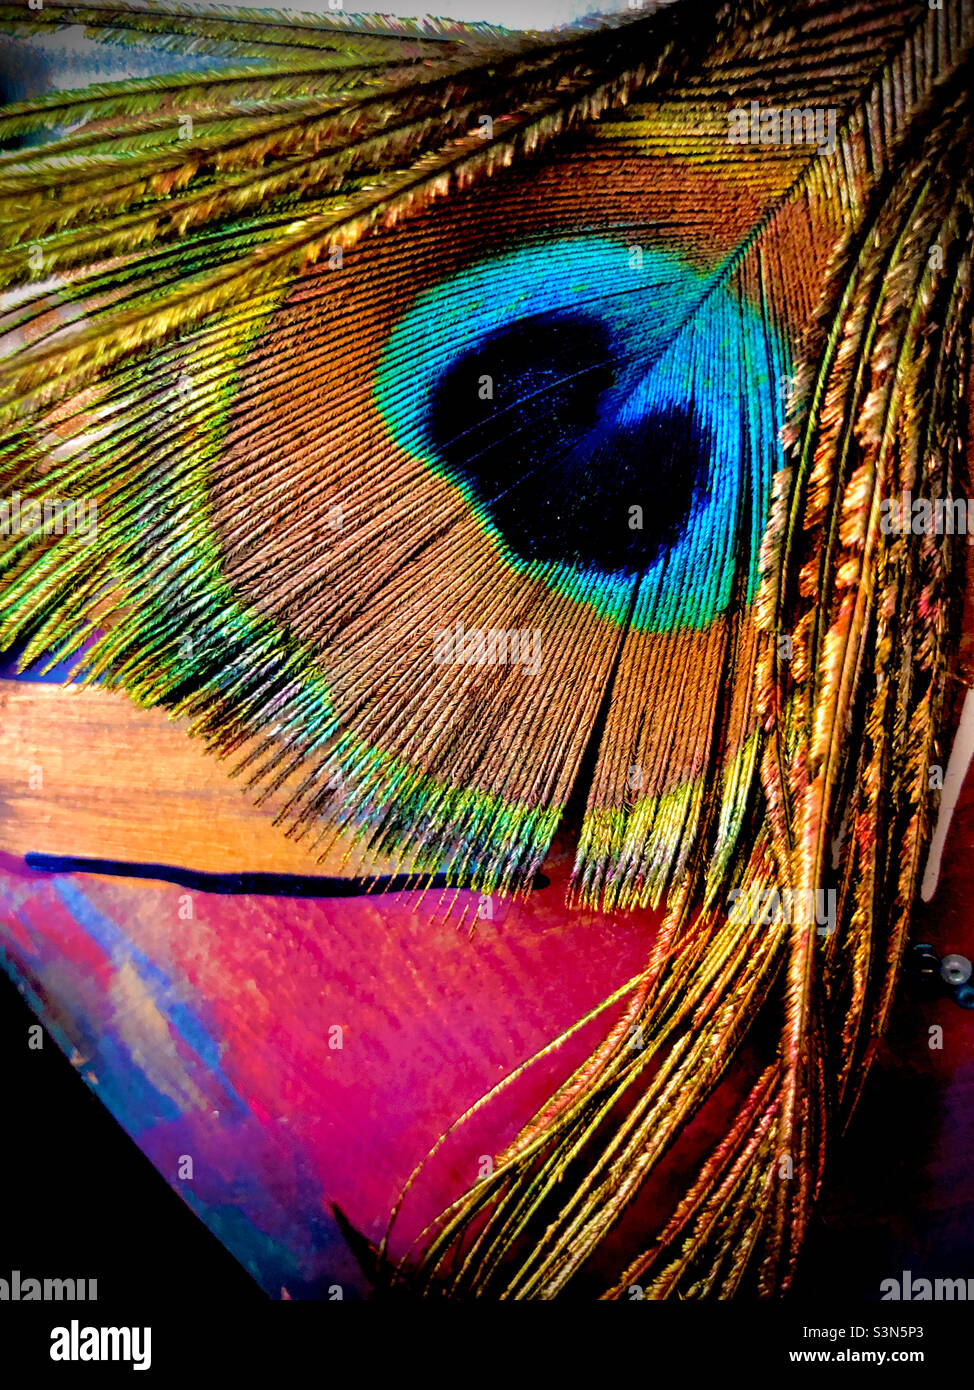 Peacock feather close-up Stock Photo